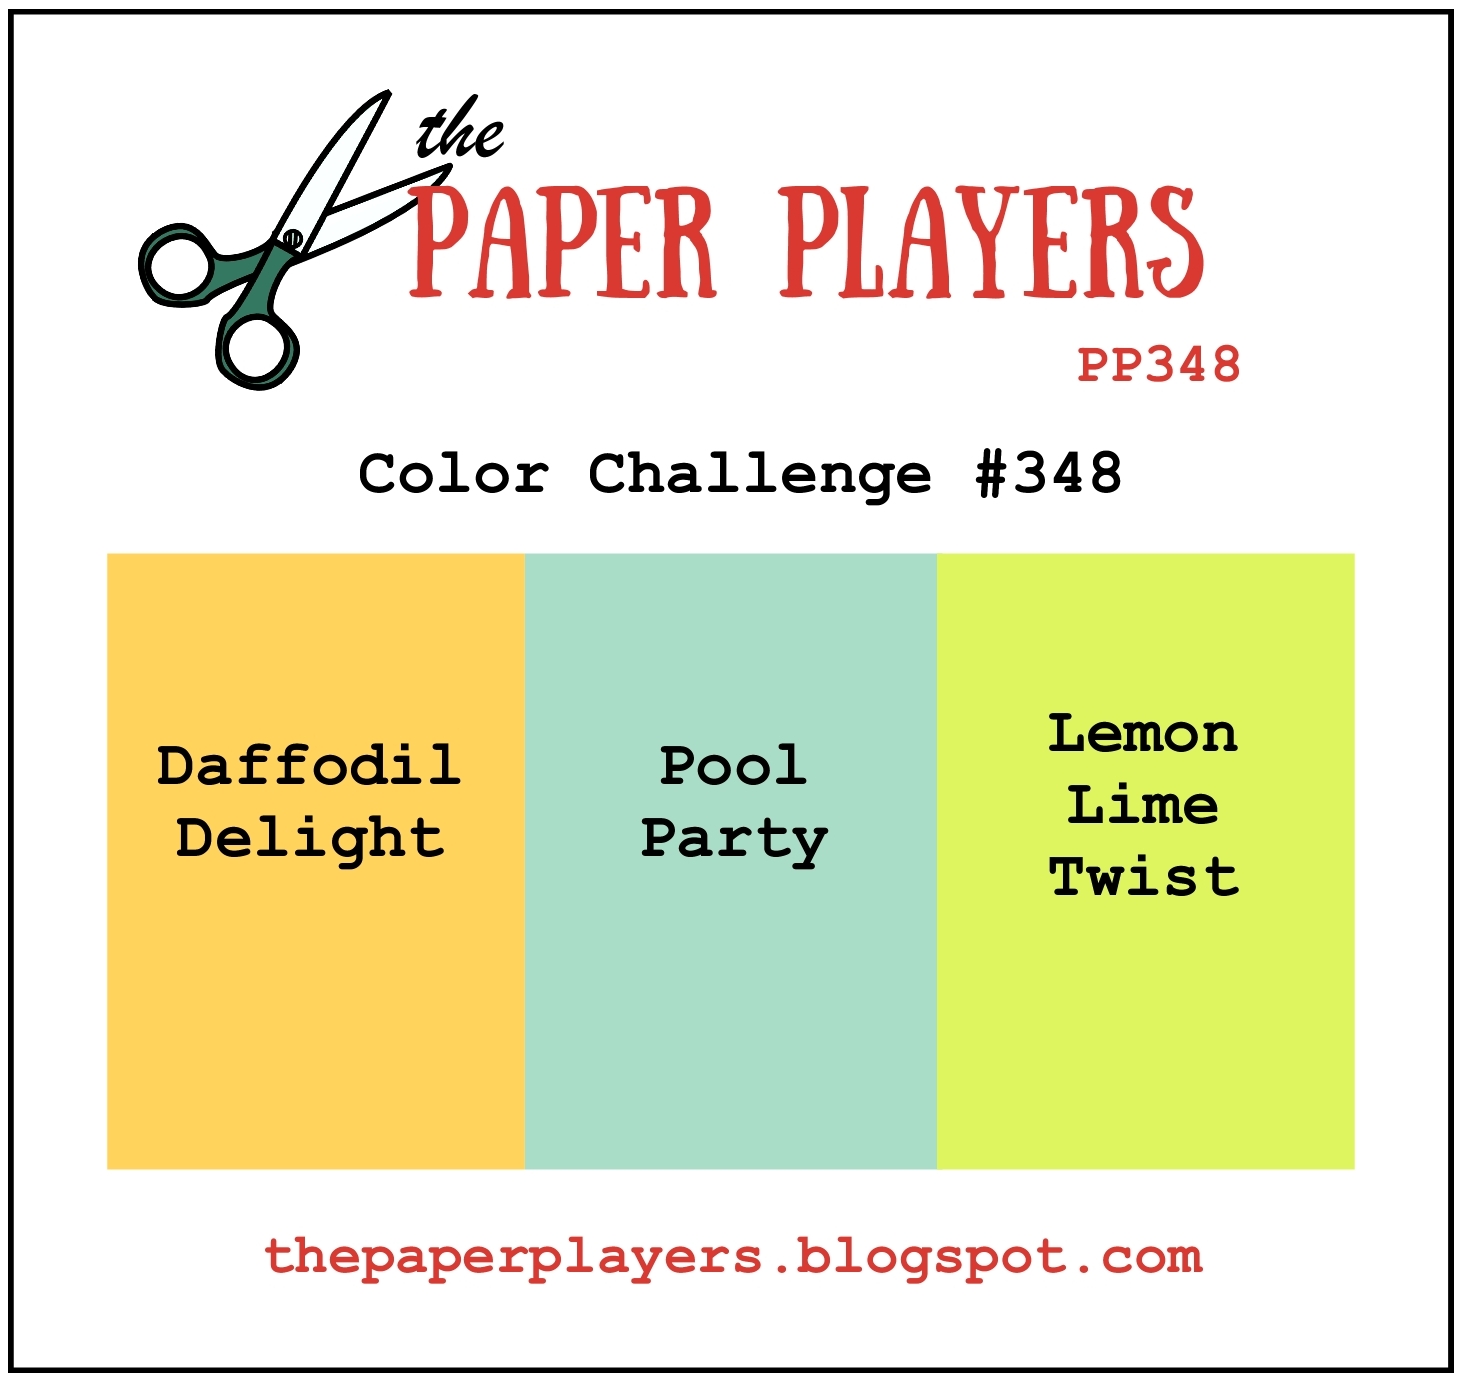 Challenge Cards. Paper plays